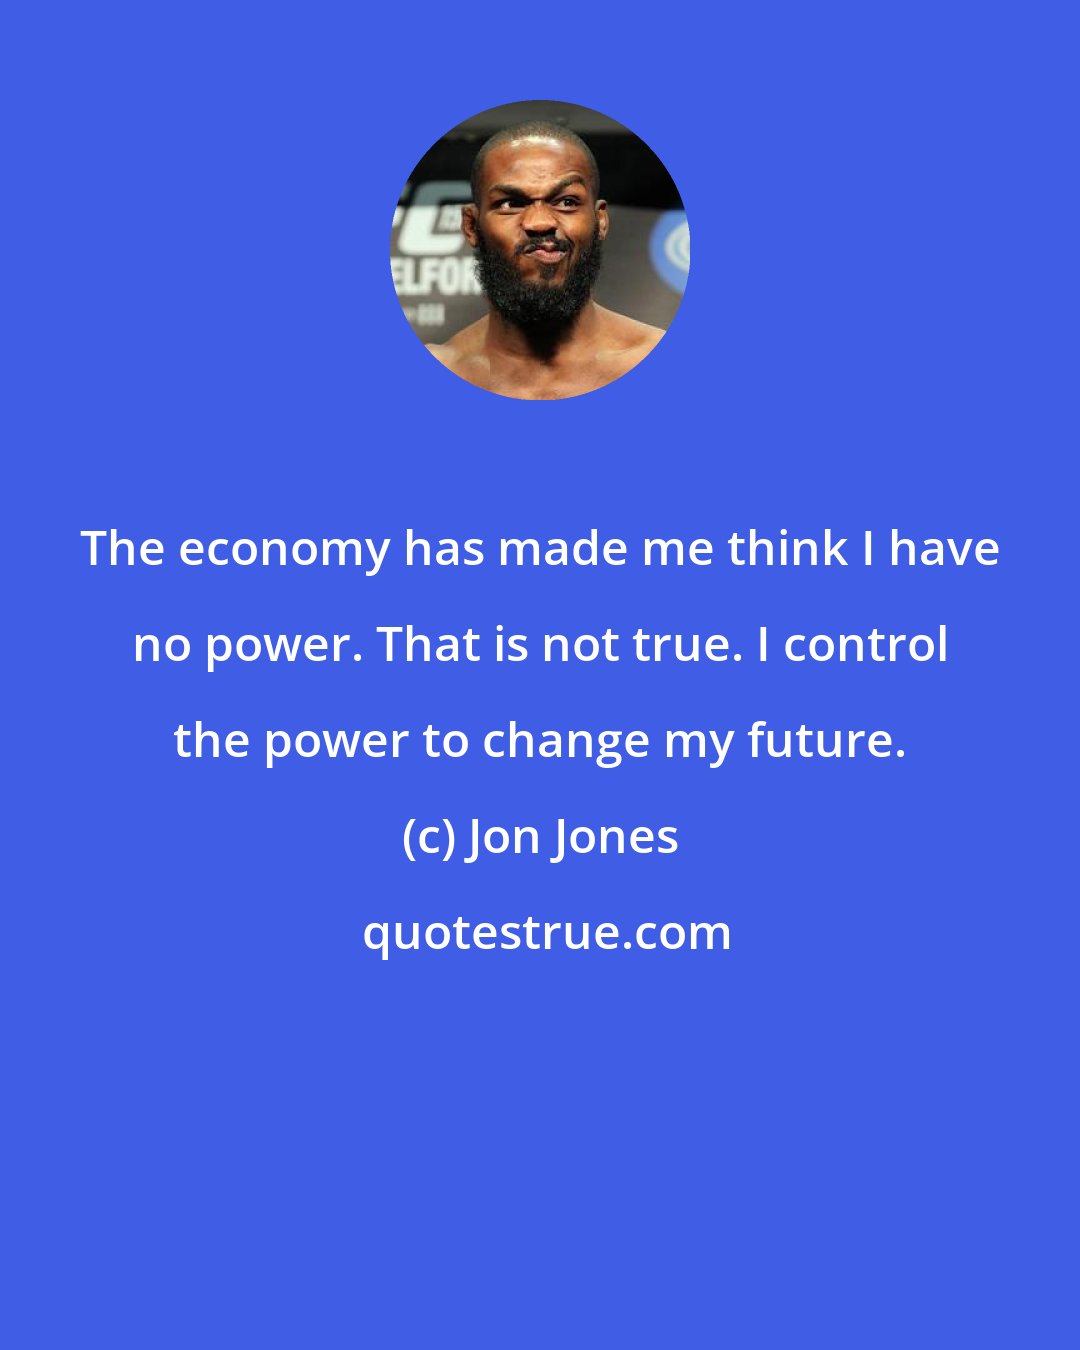 Jon Jones: The economy has made me think I have no power. That is not true. I control the power to change my future.